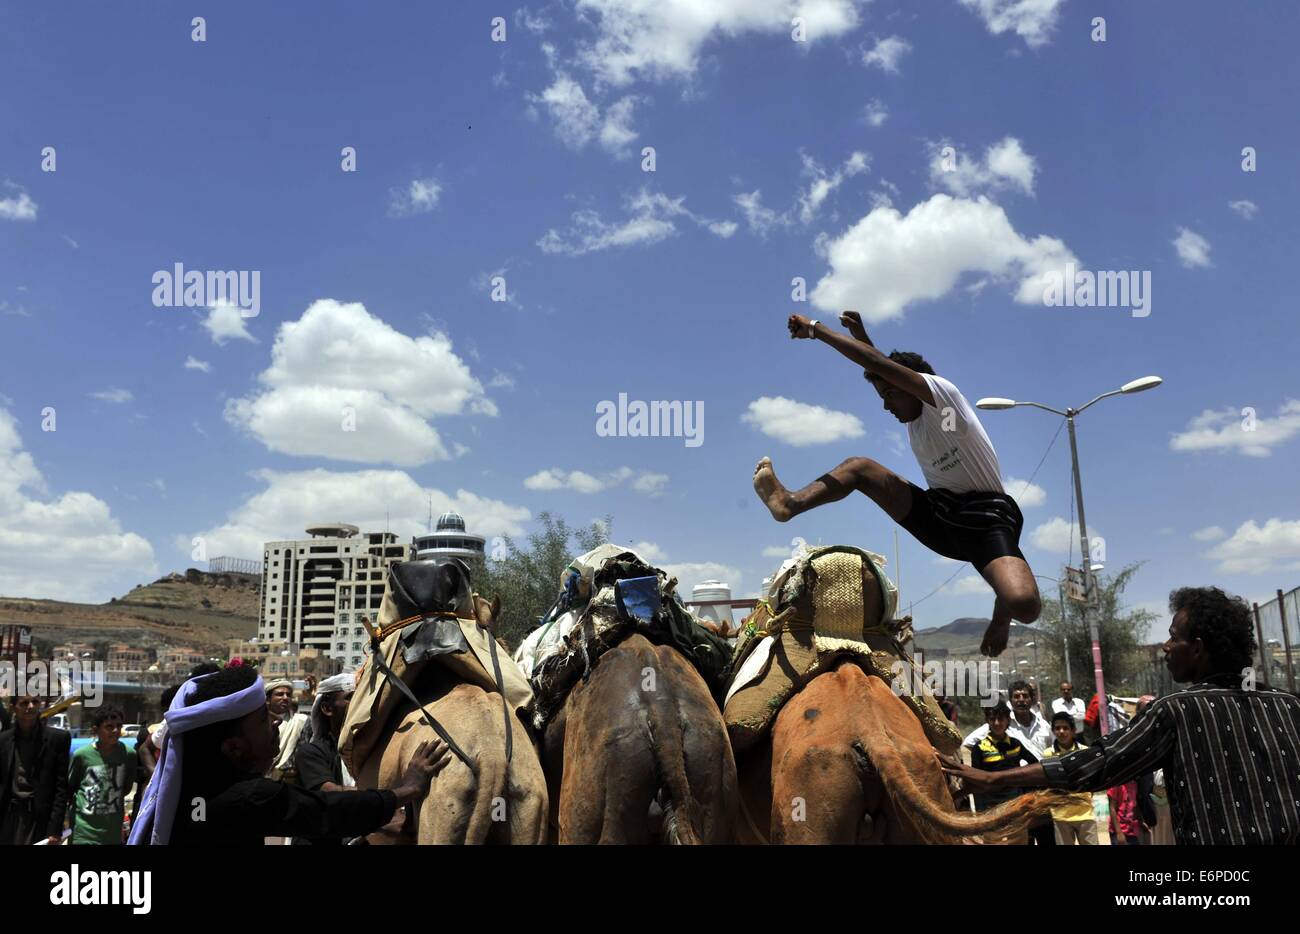 Sanaa, Yemen. 28th Aug, 2014. A Yemeni man jumps over camels during the One-Week Sanaa Summer Festival, in Sanaa, Yemen, on Aug. 28, 2014. Yemen launched the seventh Sanaa Summer Festival in the capital city of Sanaa in order to recover the tourism in the Arab country which has seen political unrest and deadly conflicts since 2011. Credit:  Mohammed Mohammed/Xinhua/Alamy Live News Stock Photo